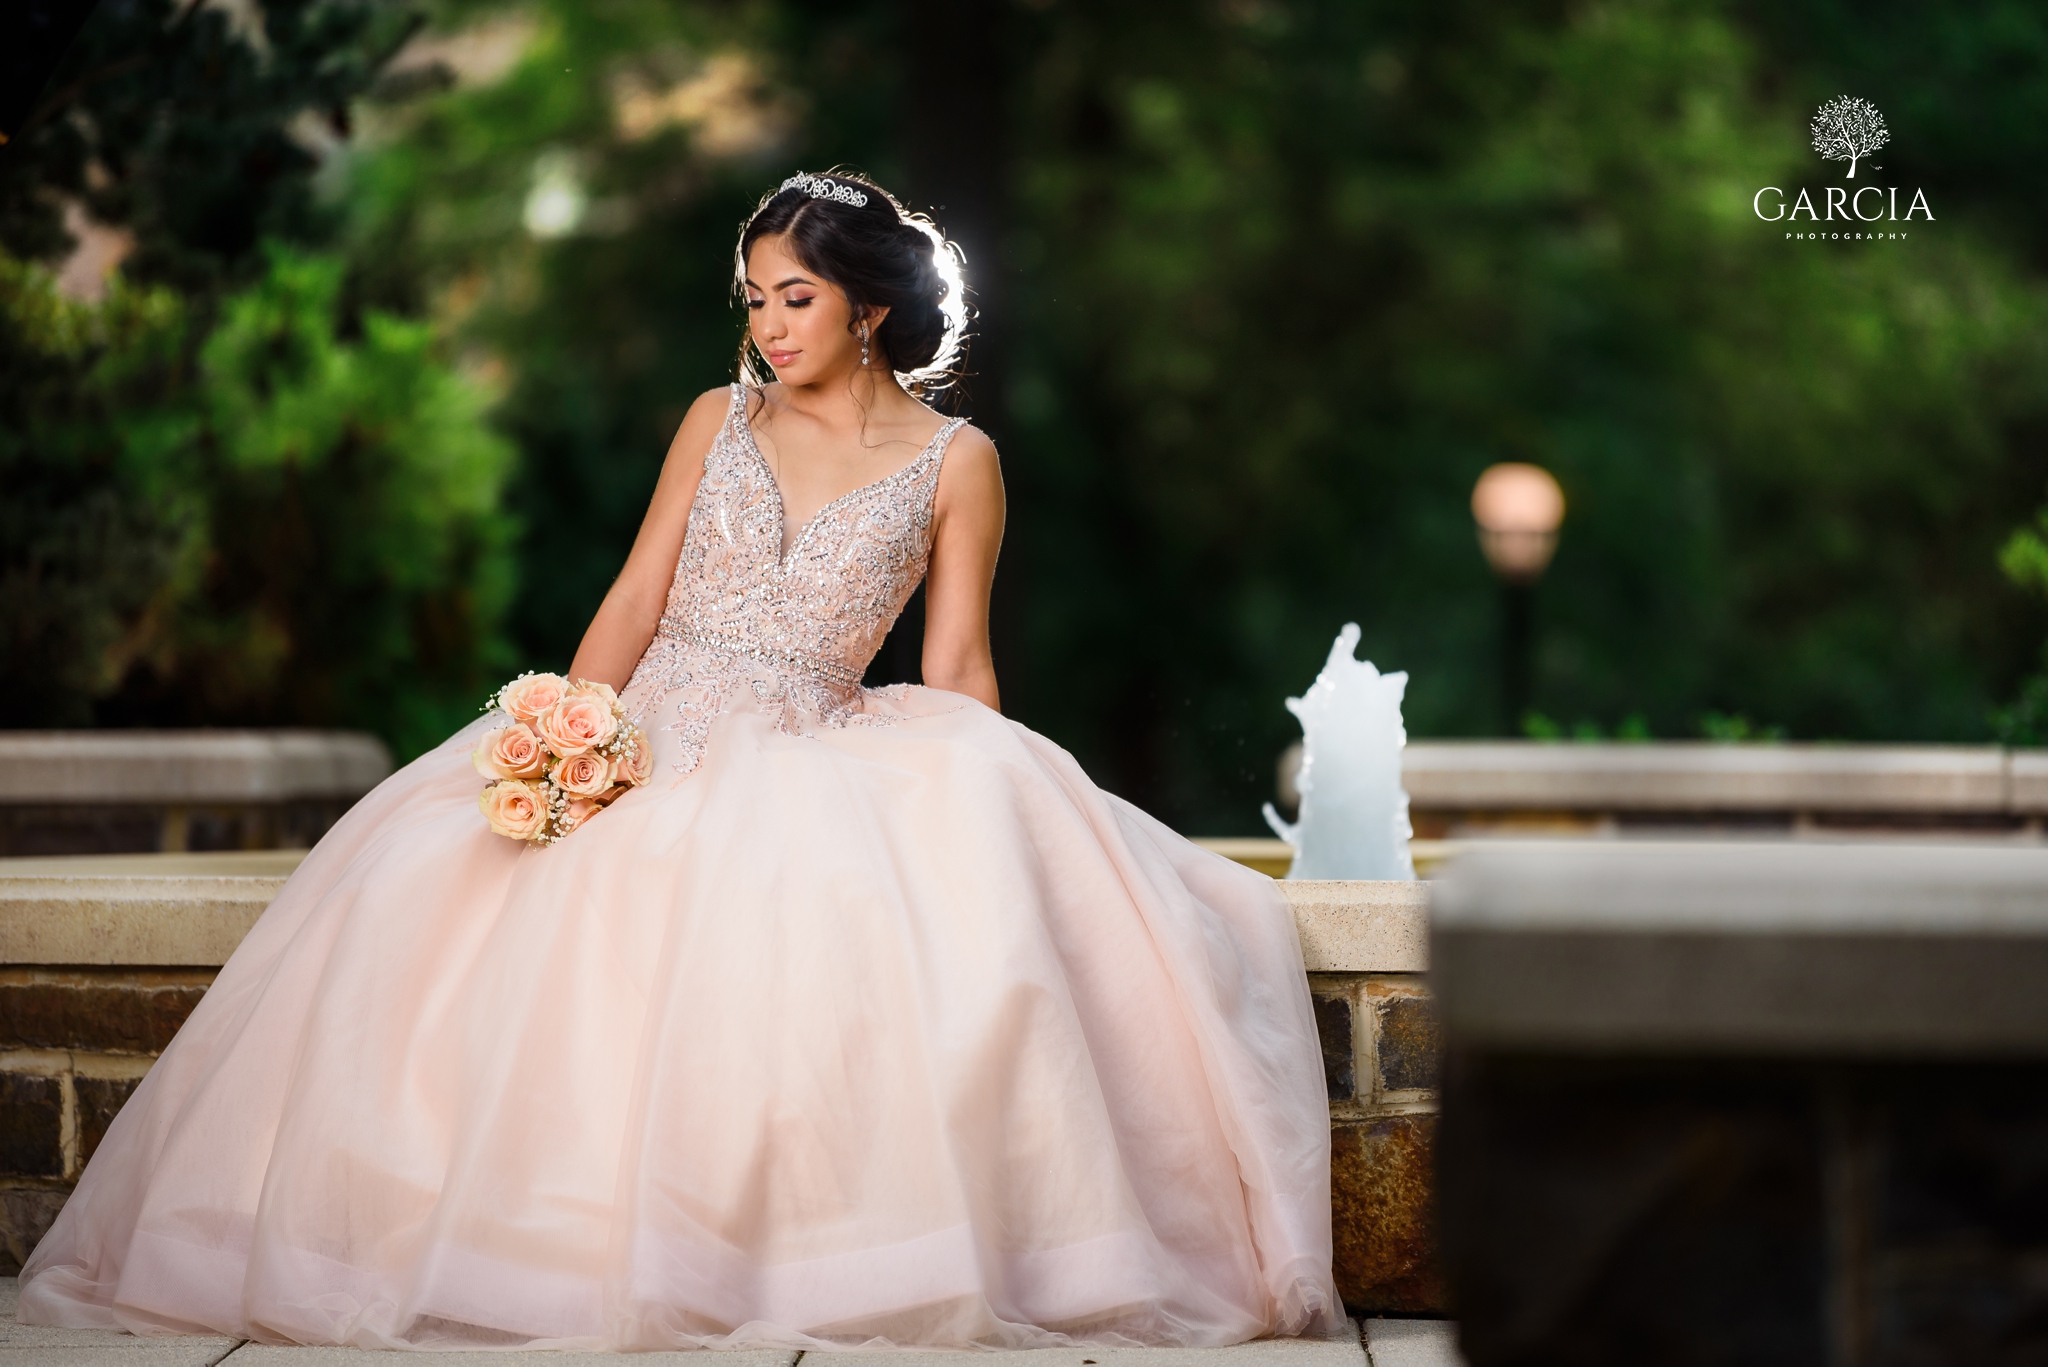 Nicole-Quince-Session-Garcia-Photography-4874.jpg